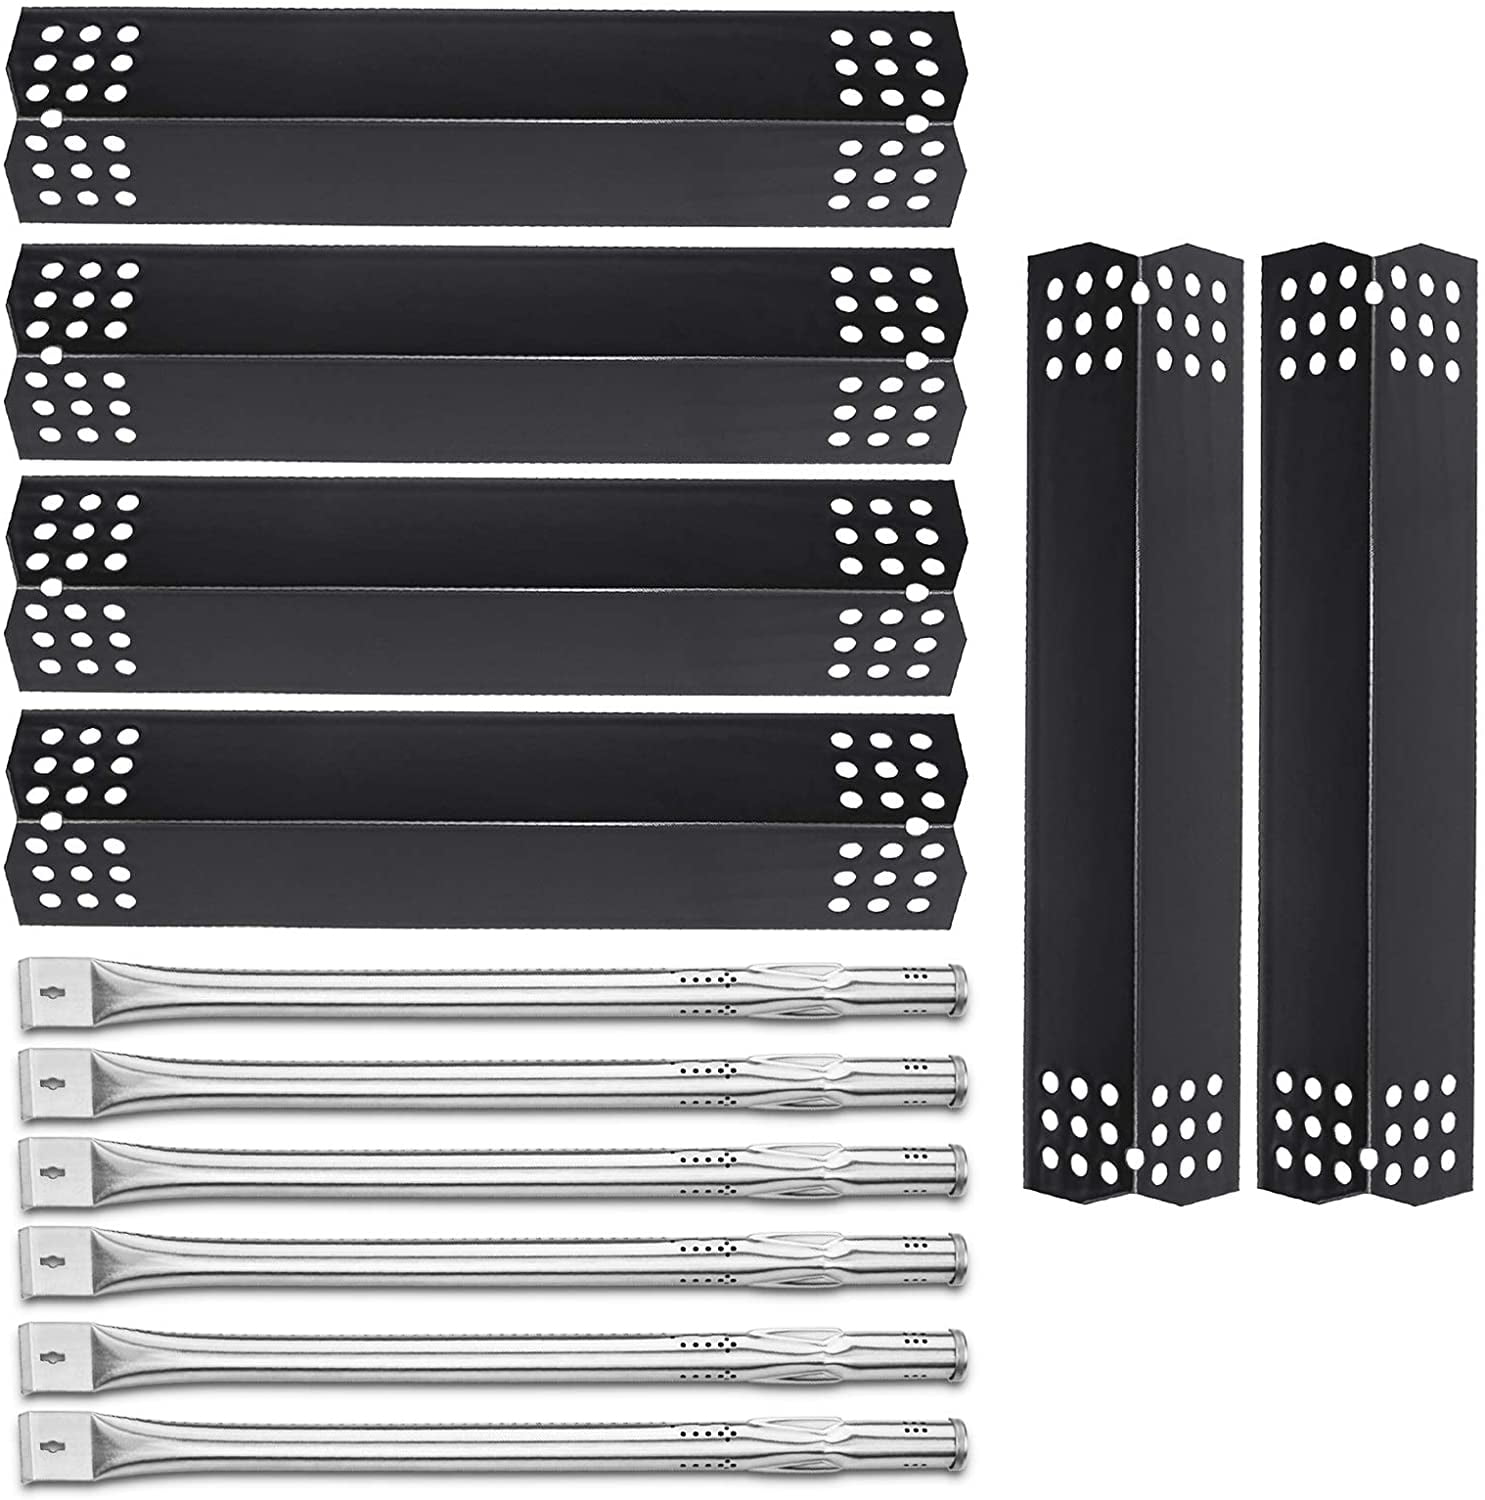 Slør bekymring elevation Hisencn Grill Parts Kit for Home Depot Nexgrill 6 Burner Gas Grill,  Stainless Steel Pipe Burners Heat Plates Tent Sheids Flame Tamers Grill  Replacement Kit - Walmart.com